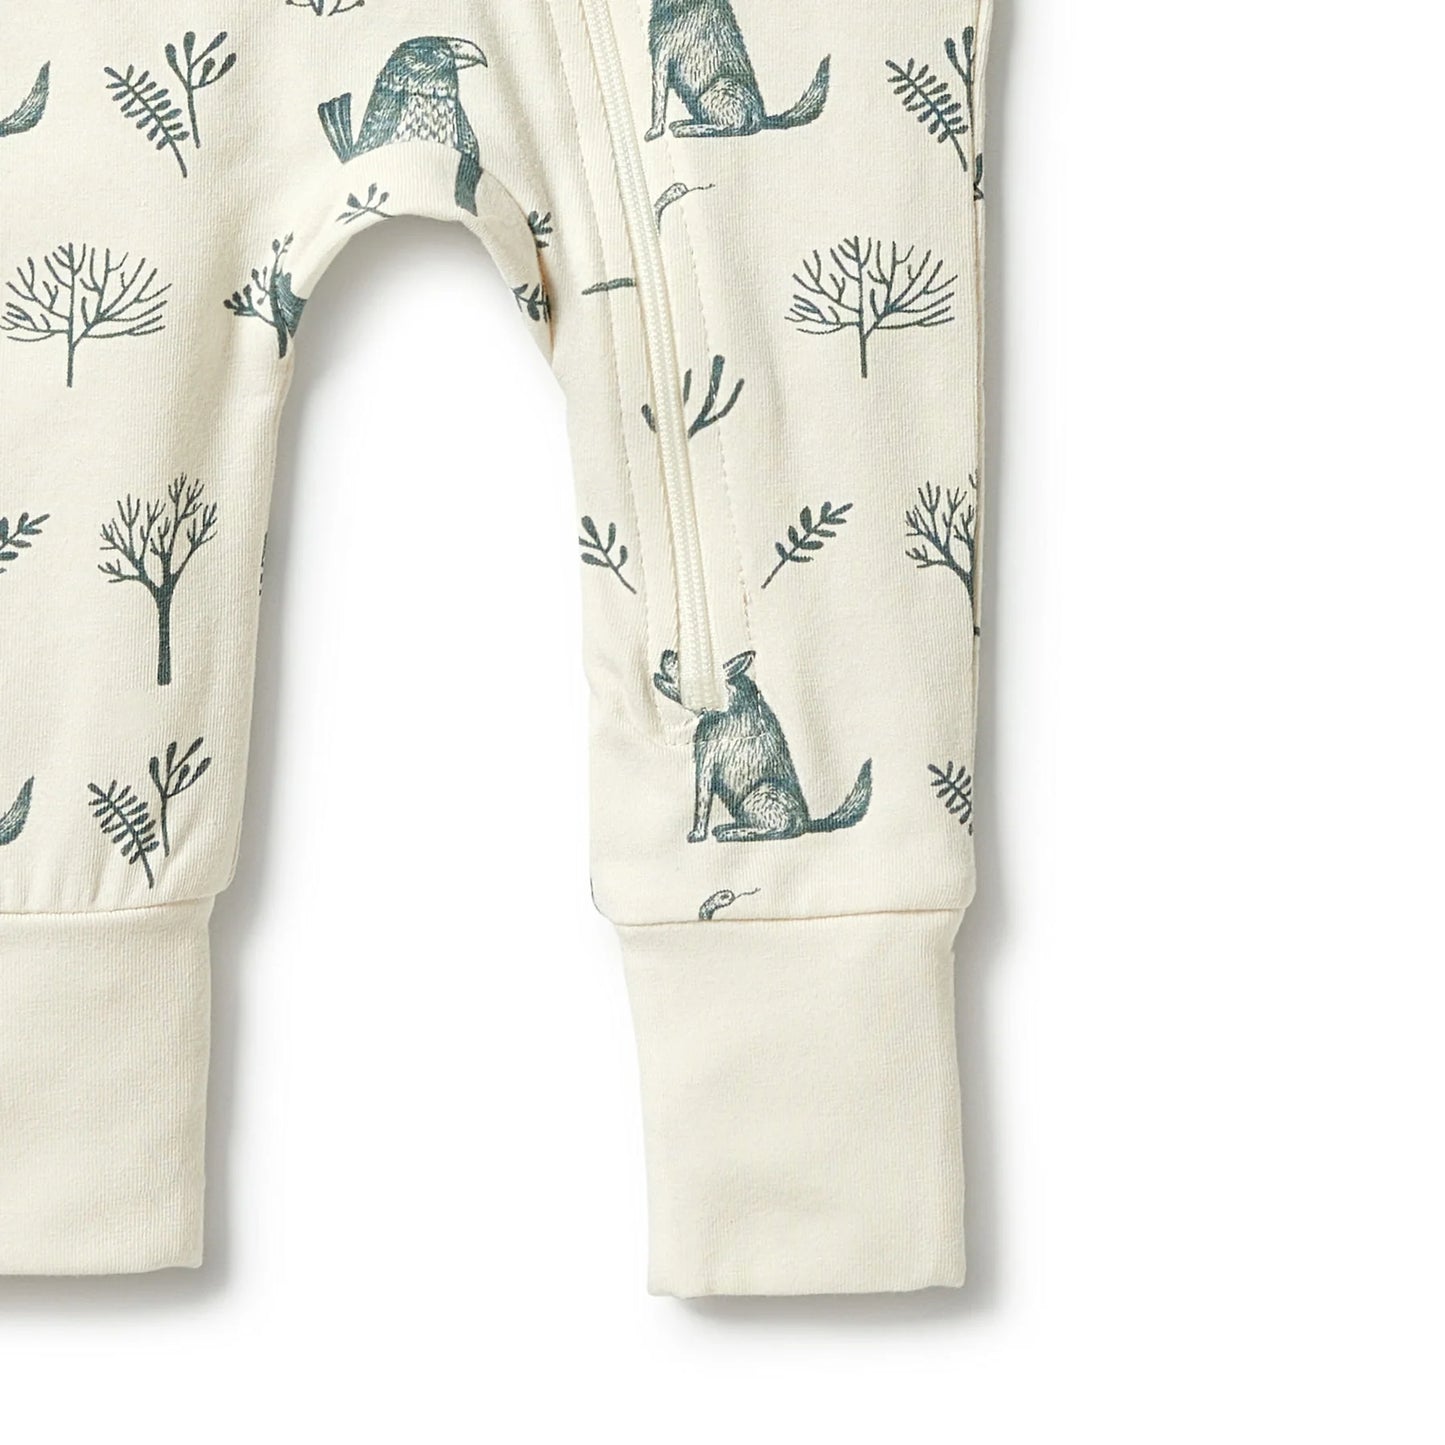 Wilson & Frenchy Organic Zipsuit with Feet - The Woods